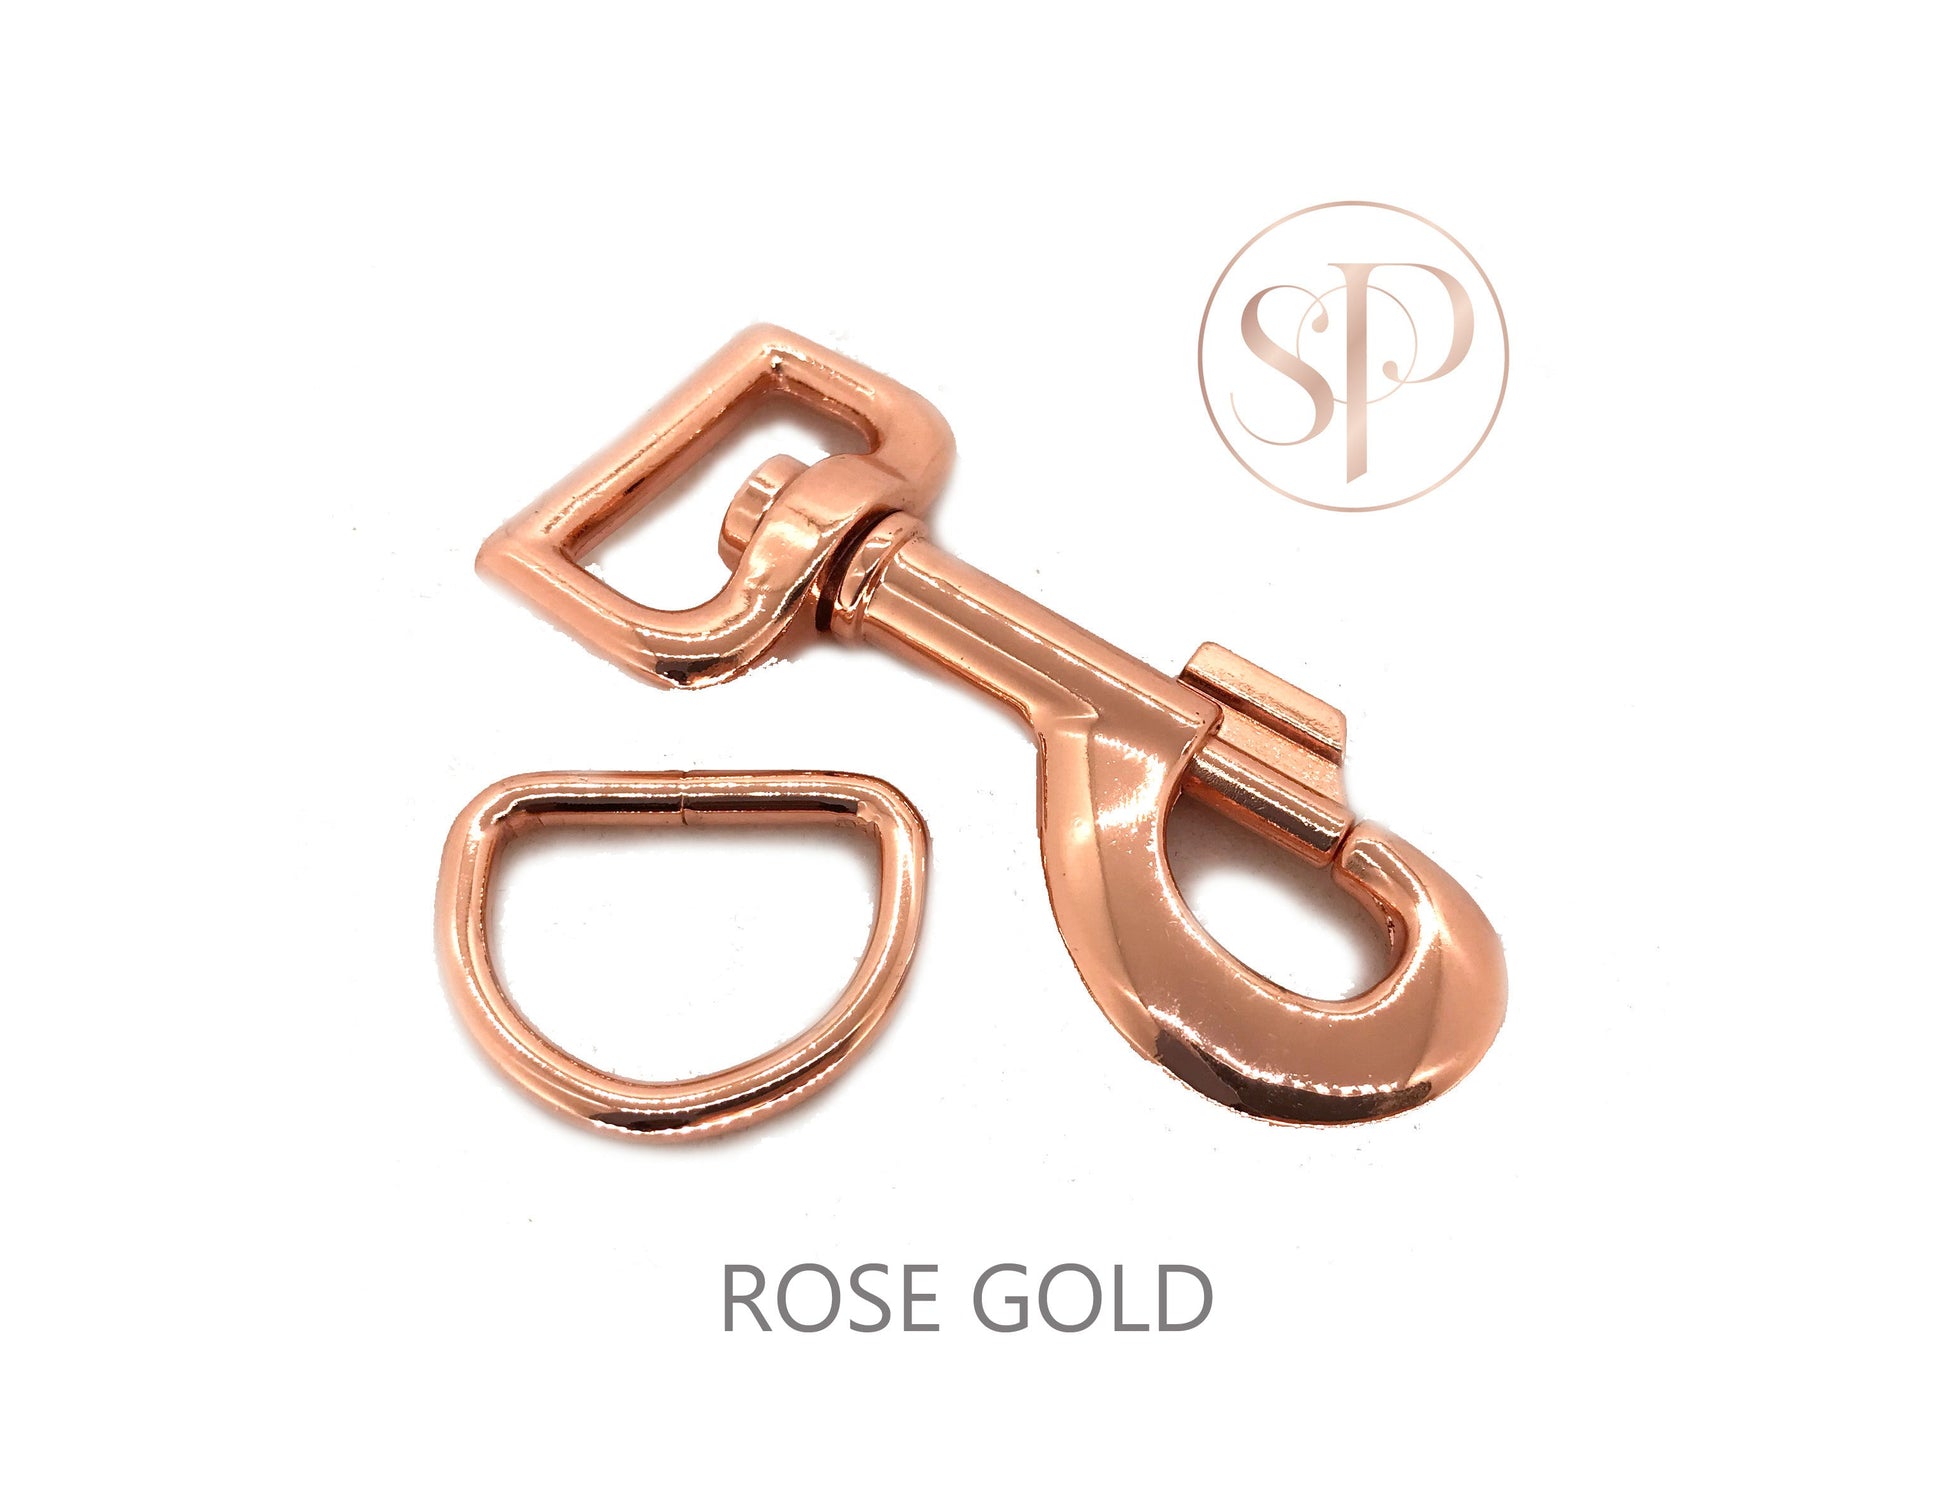 Rose Gold lead clasp and d-ring